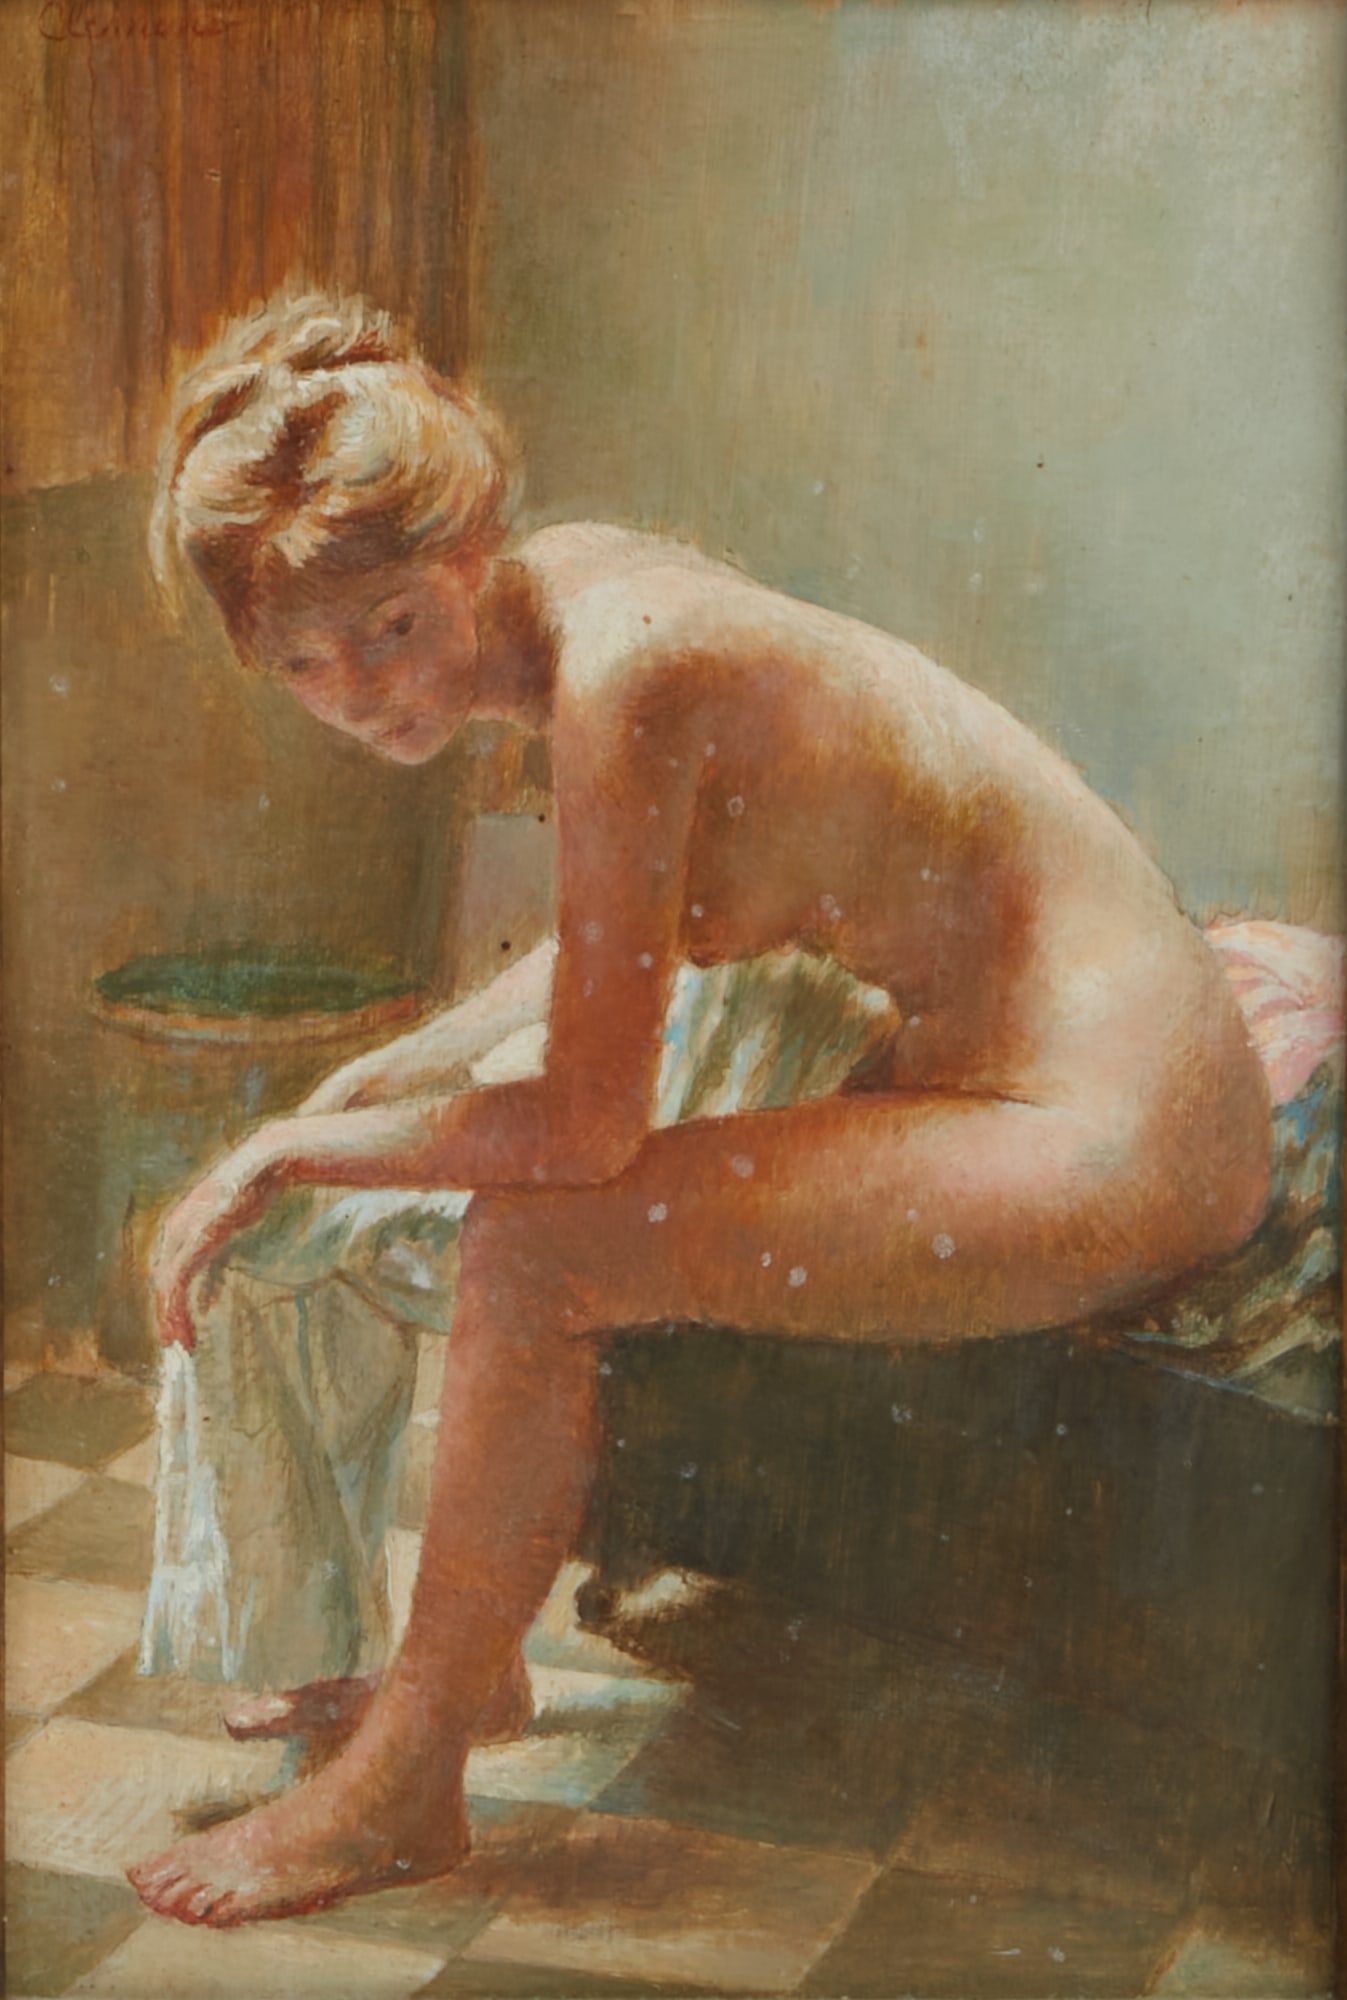 UNKNOWN ARTIST SEATED FEMALE NUDEUnknown 2fb38d8